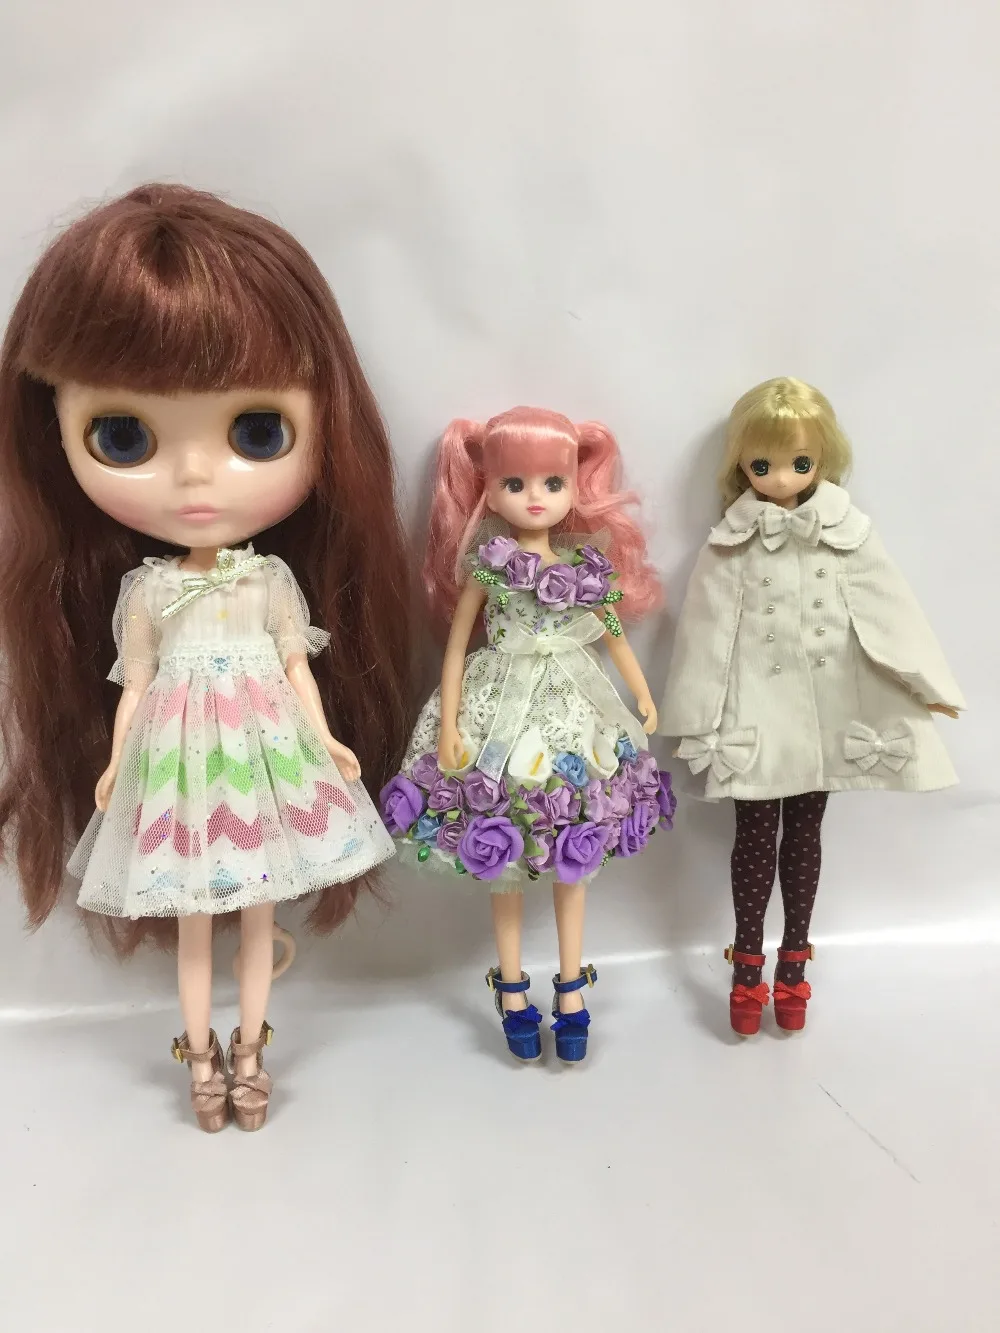 2Doll Ankle Belt Shoes Flat Shoes for 1/6 Azone Licca Blythe Dolls Dress up 